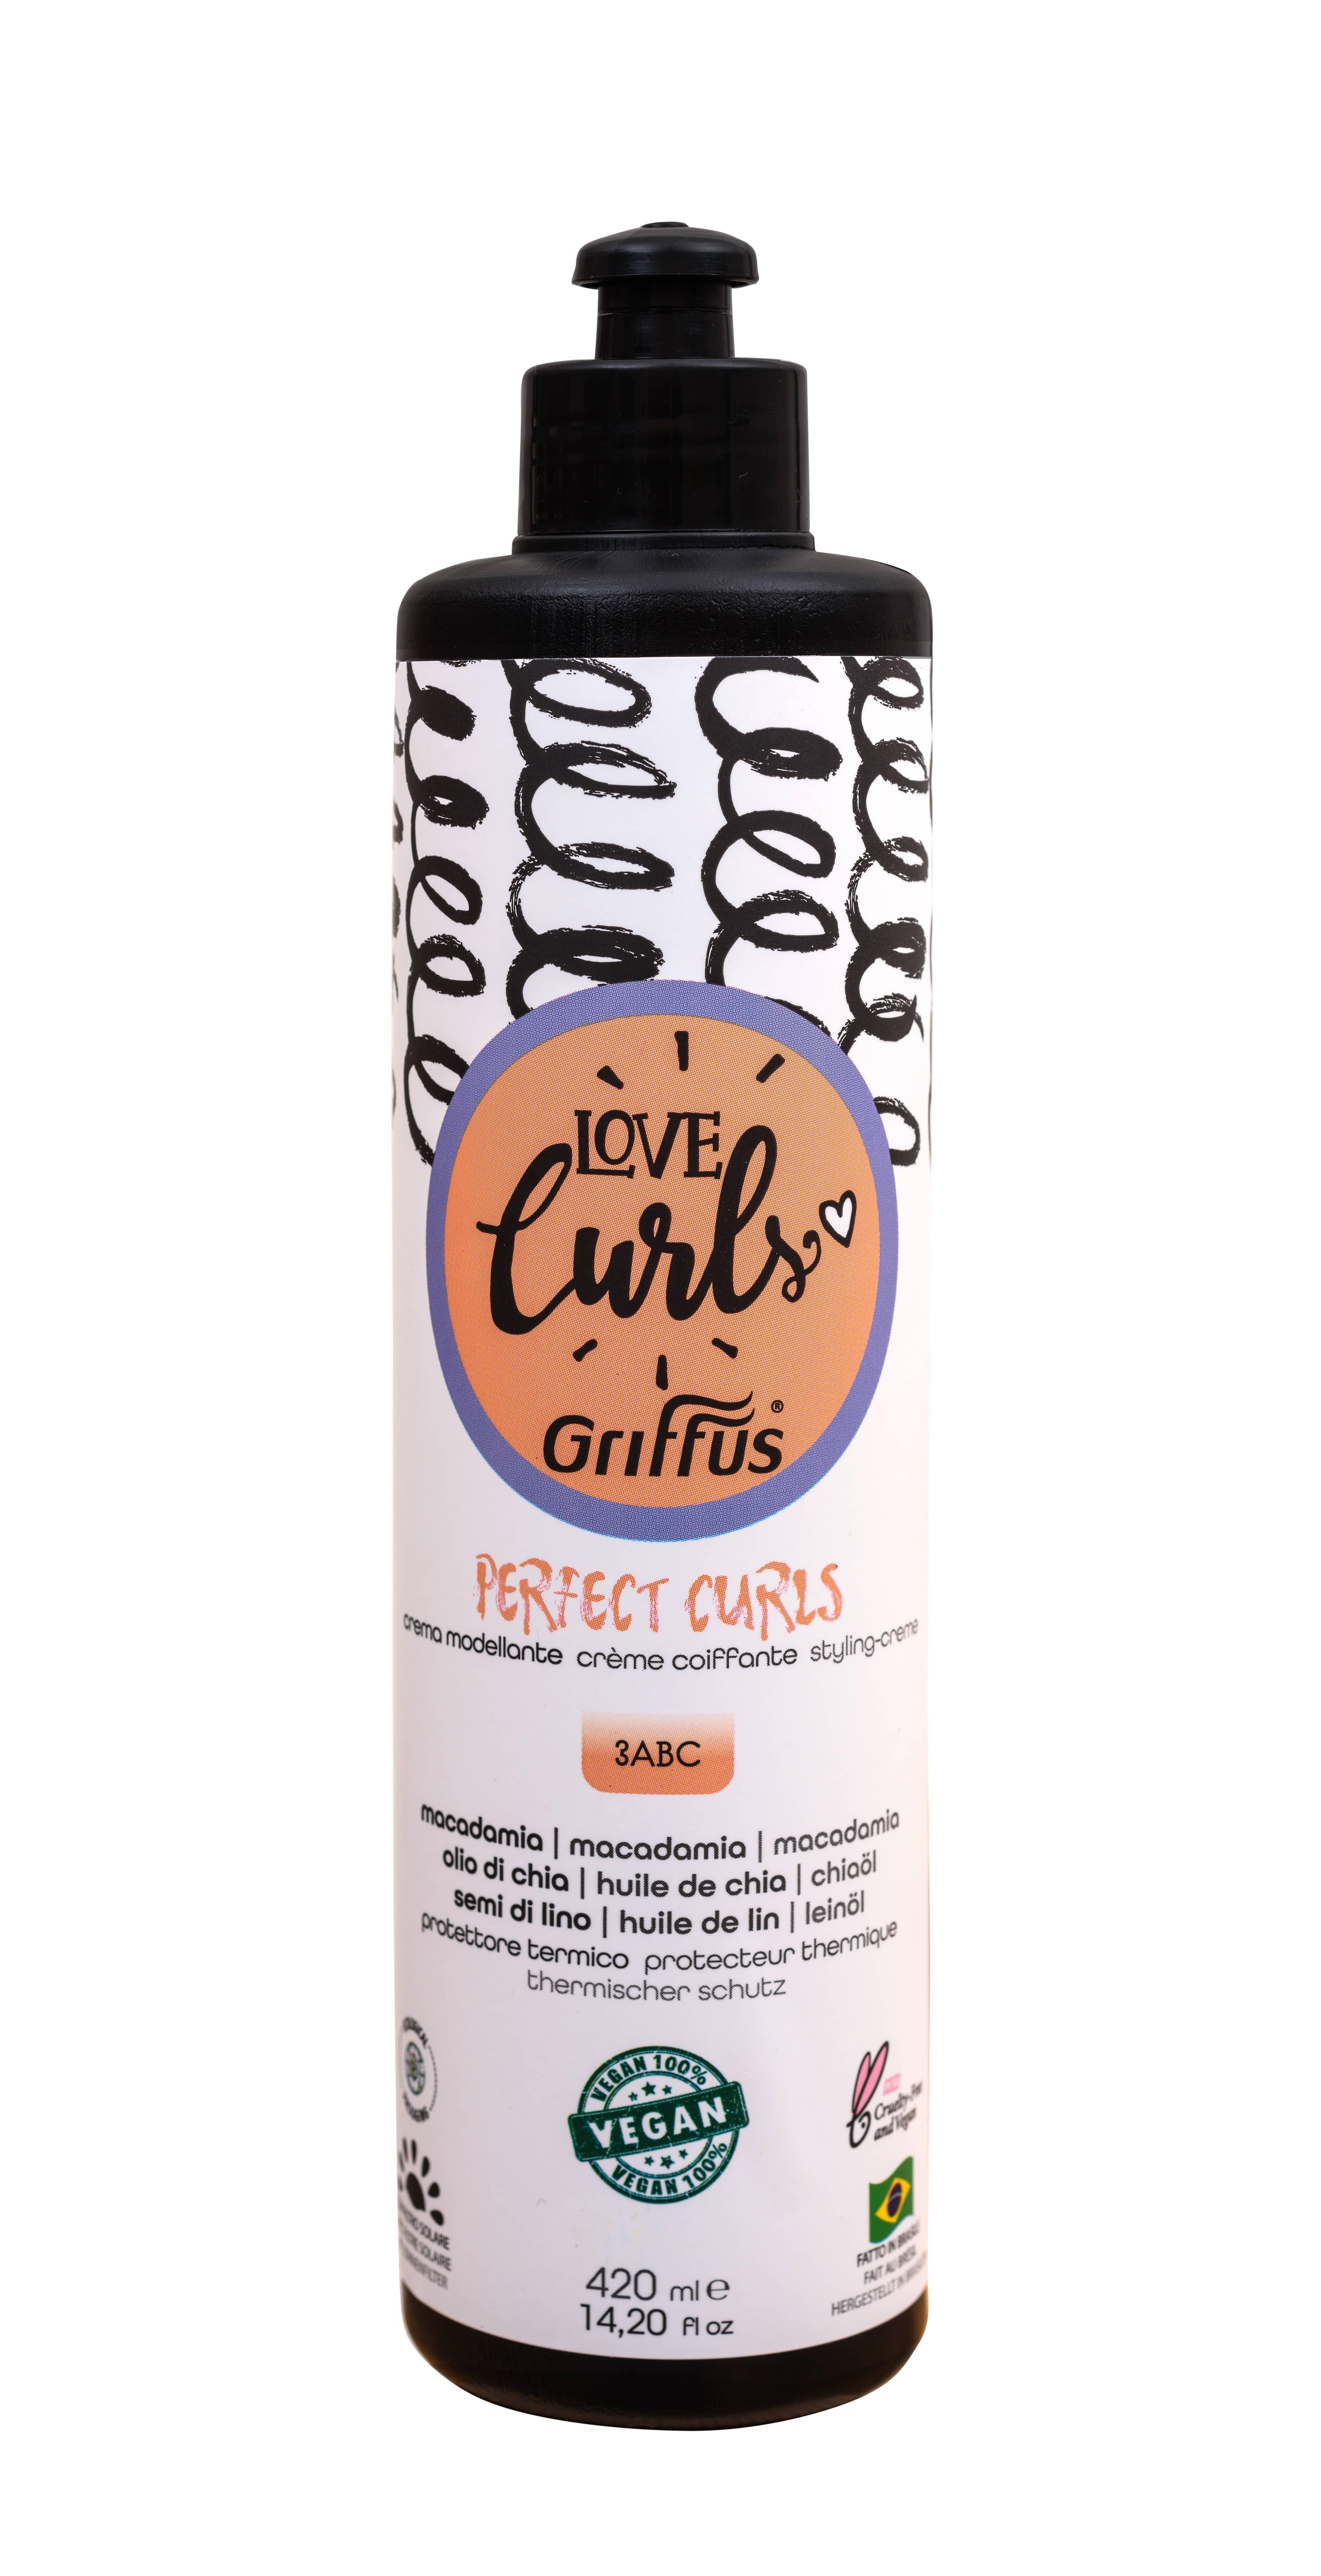 Griffus  Griffus Love Curls Perfect Curls Styling Creme 420 ML 3ABC lockiges haar 